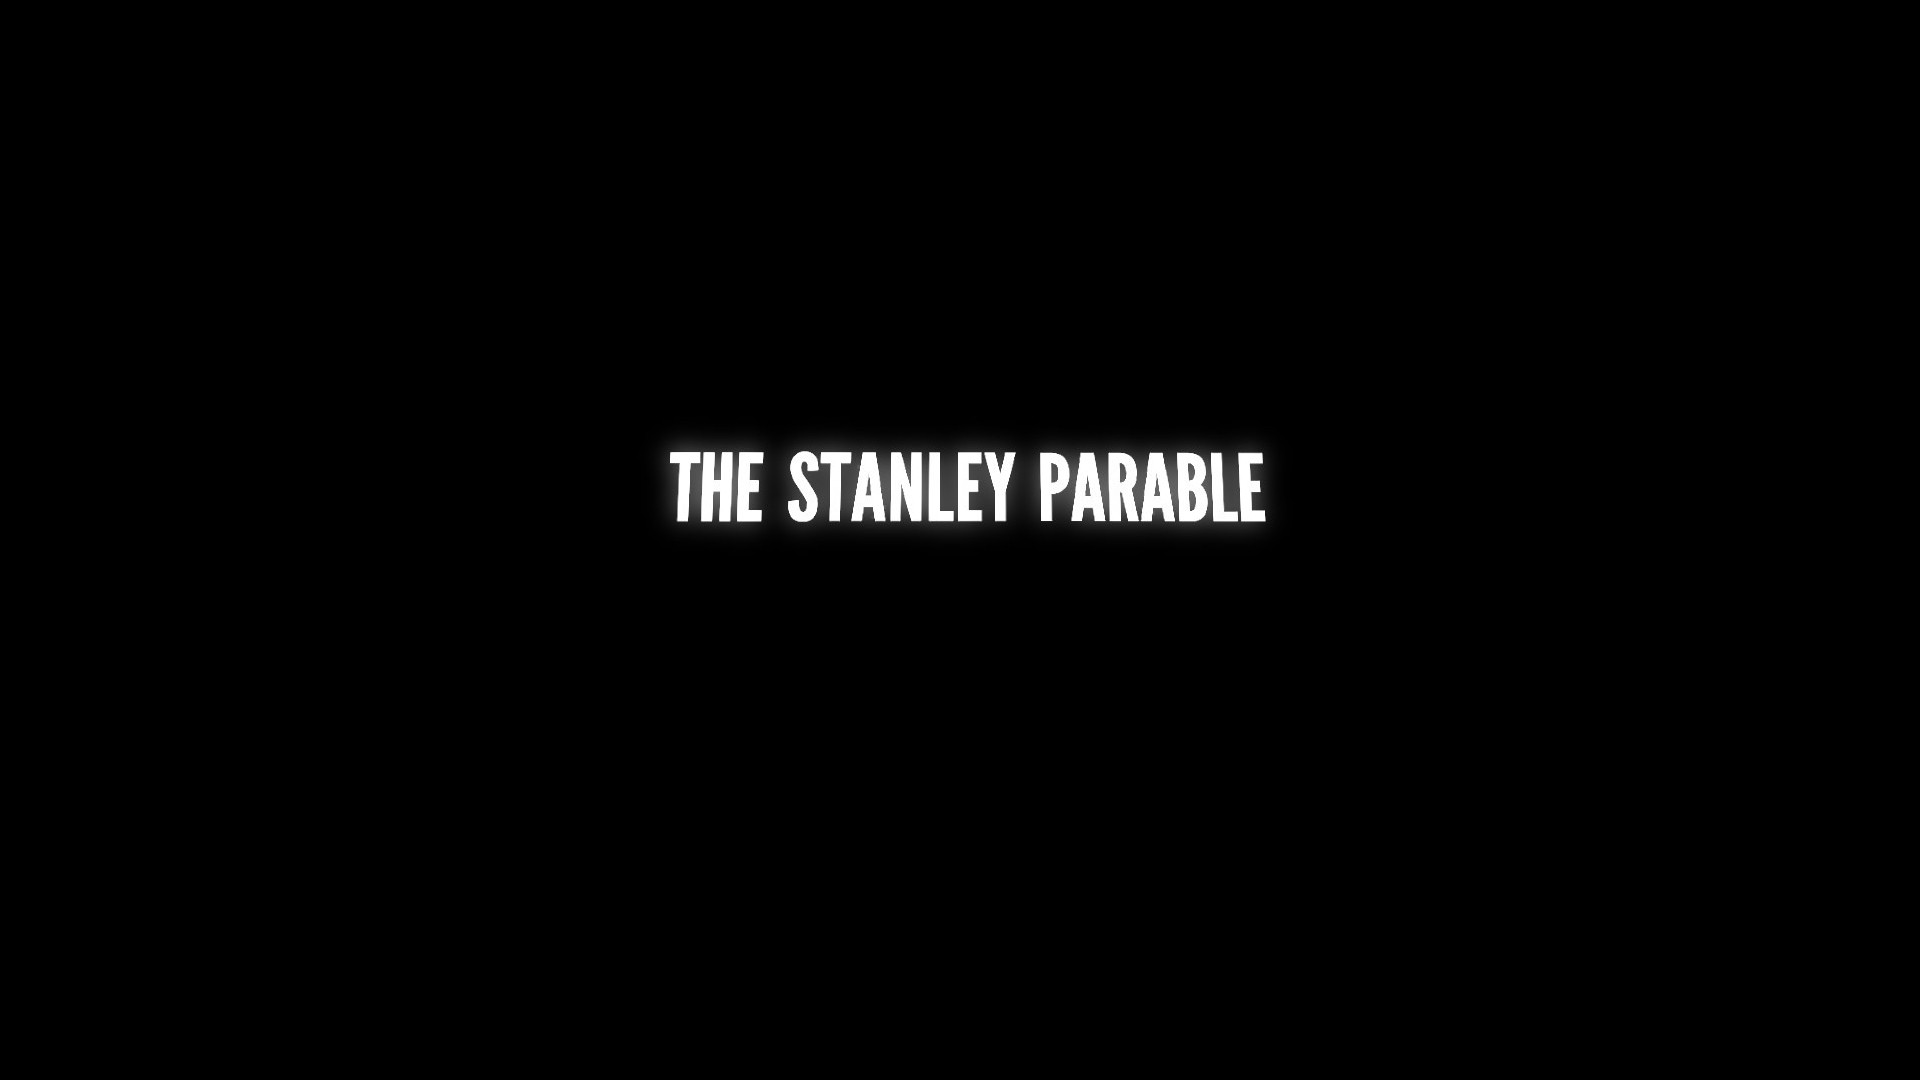 The Stanley Parable Typography Black Background Minimalism 1920x1080